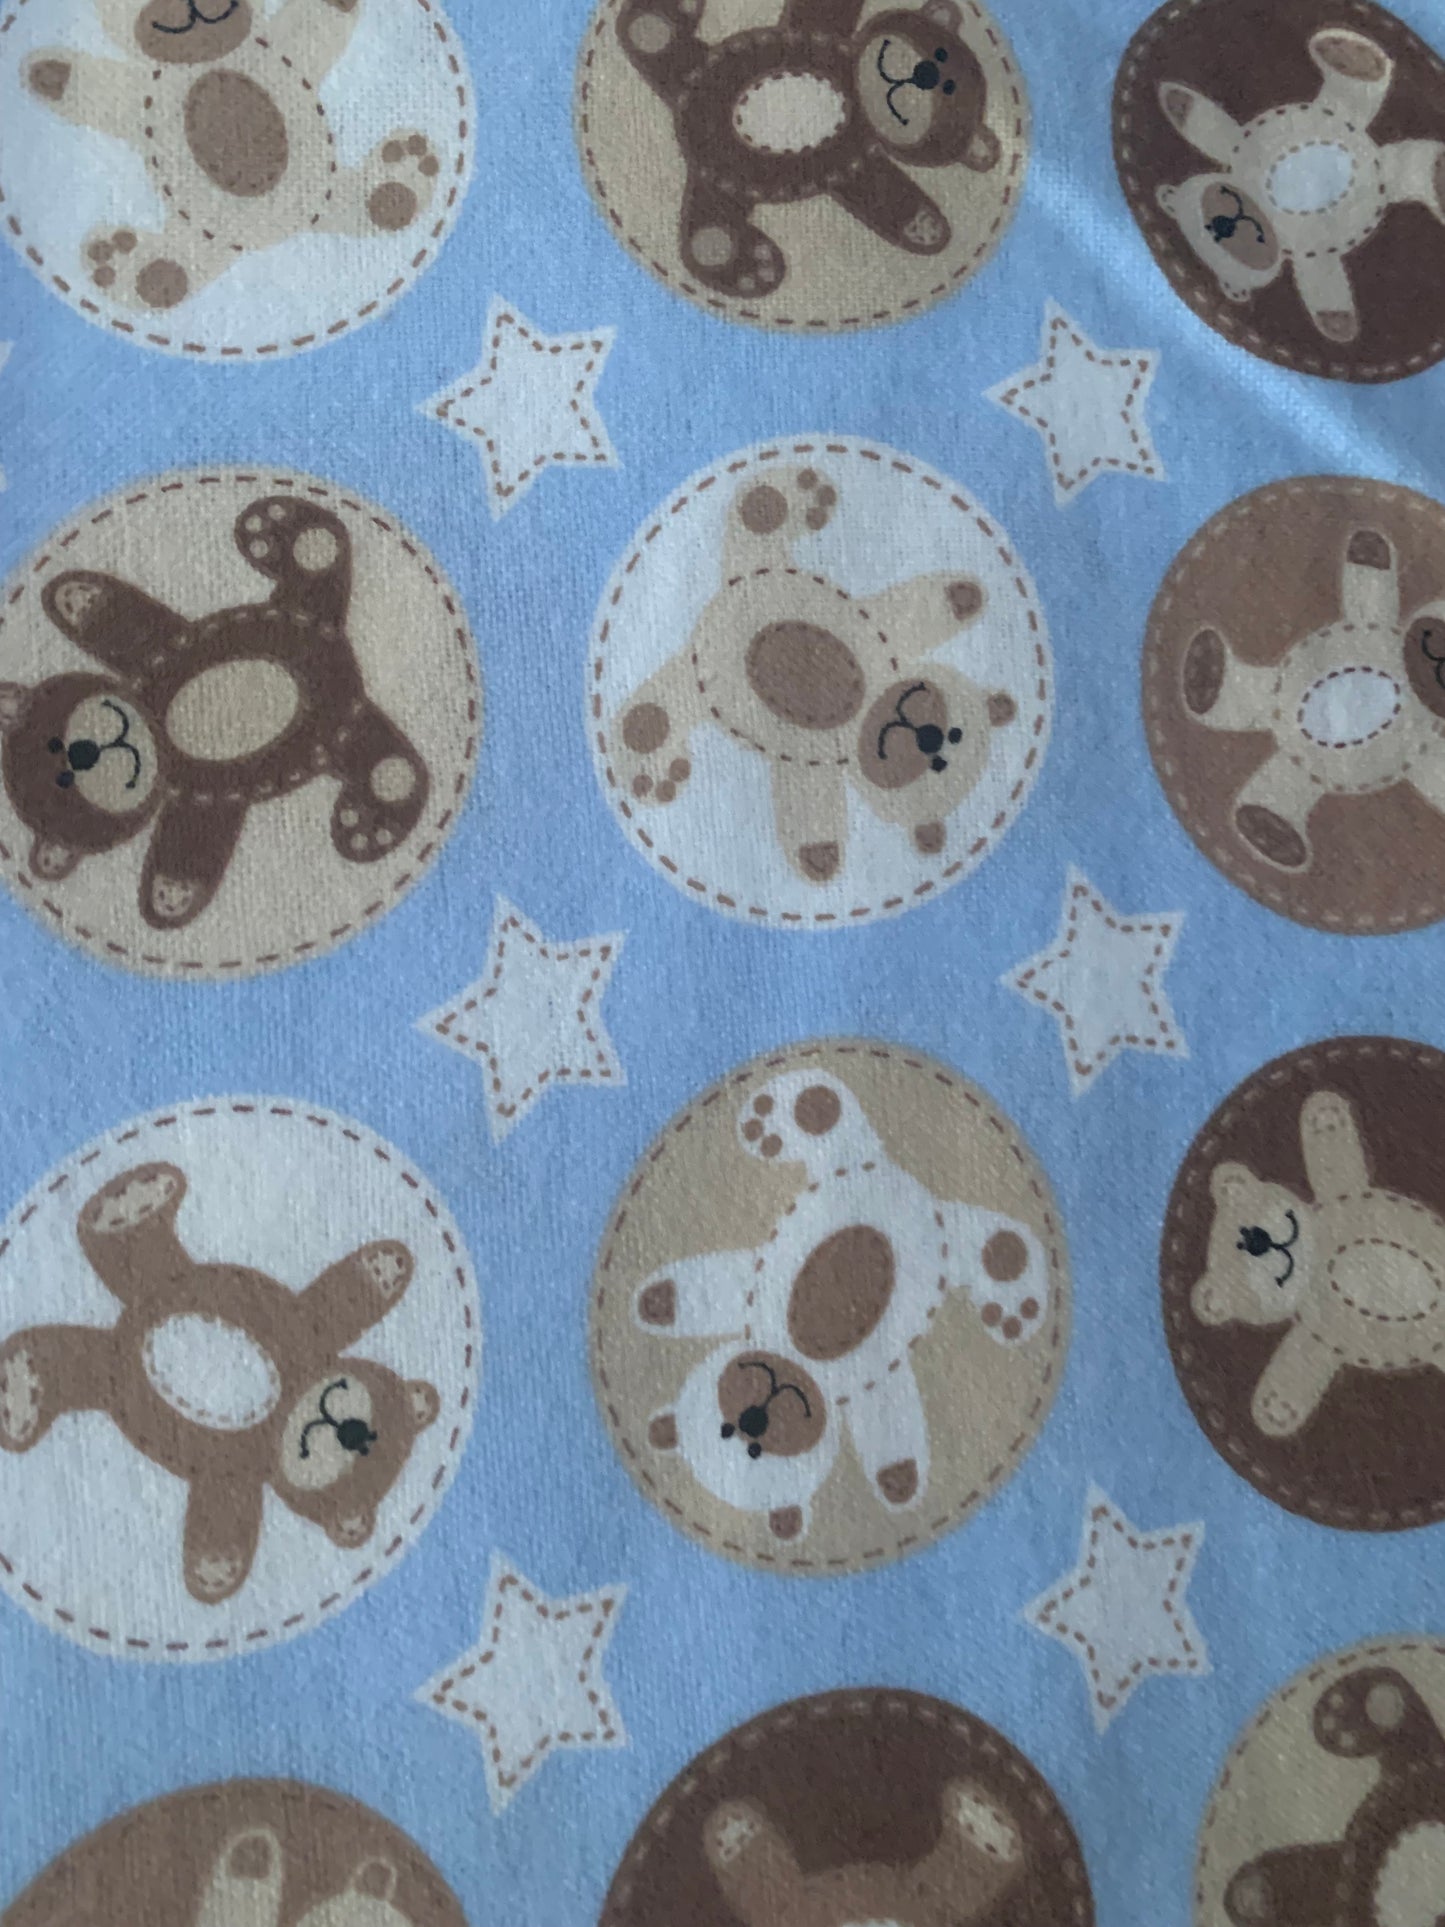 Child Weighted blanket, crib or lap size with 5 lbs, bears, giraffe, moon, star, baby jungle animals, washable, toddler or kids